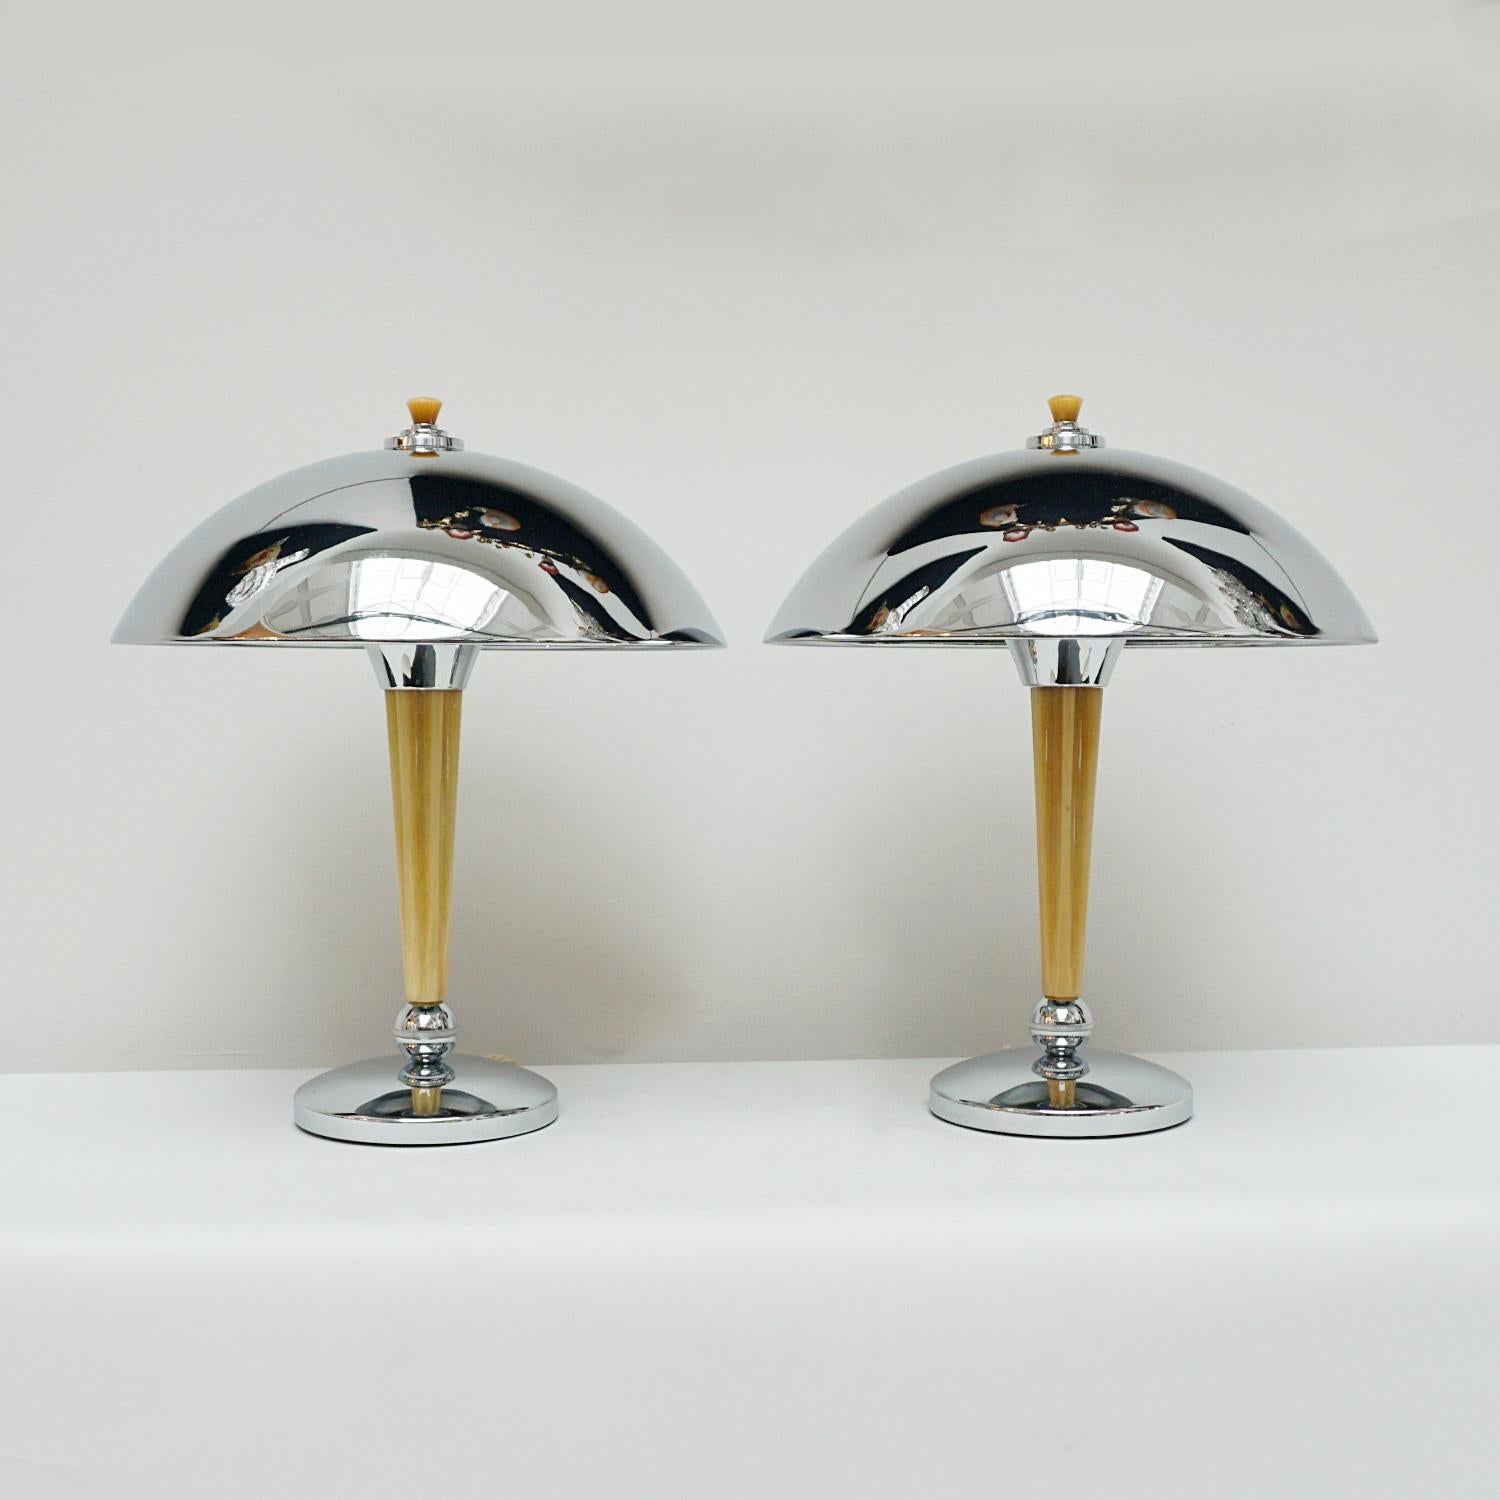 A Pair of Chromed Art Deco Style Table Lamps  In Good Condition For Sale In Forest Row, East Sussex